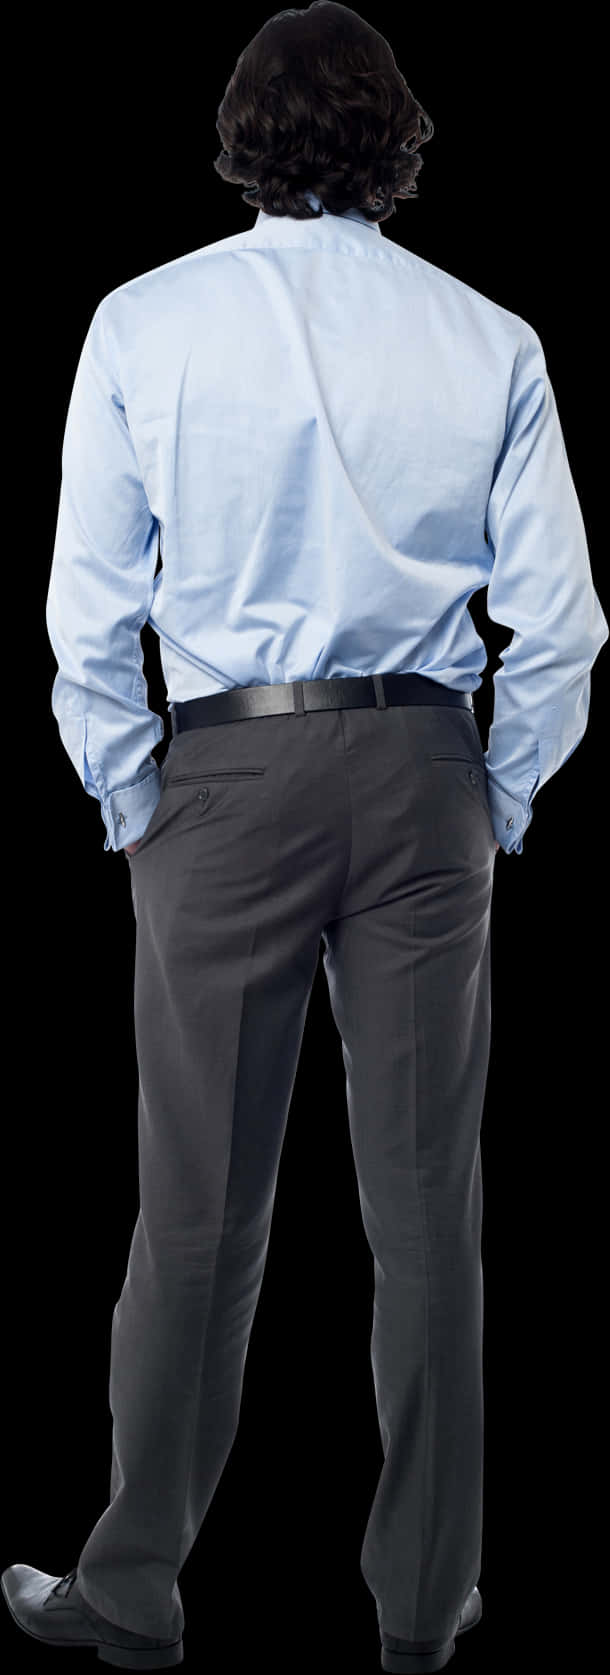 A Man In A Blue Shirt And Gray Pants